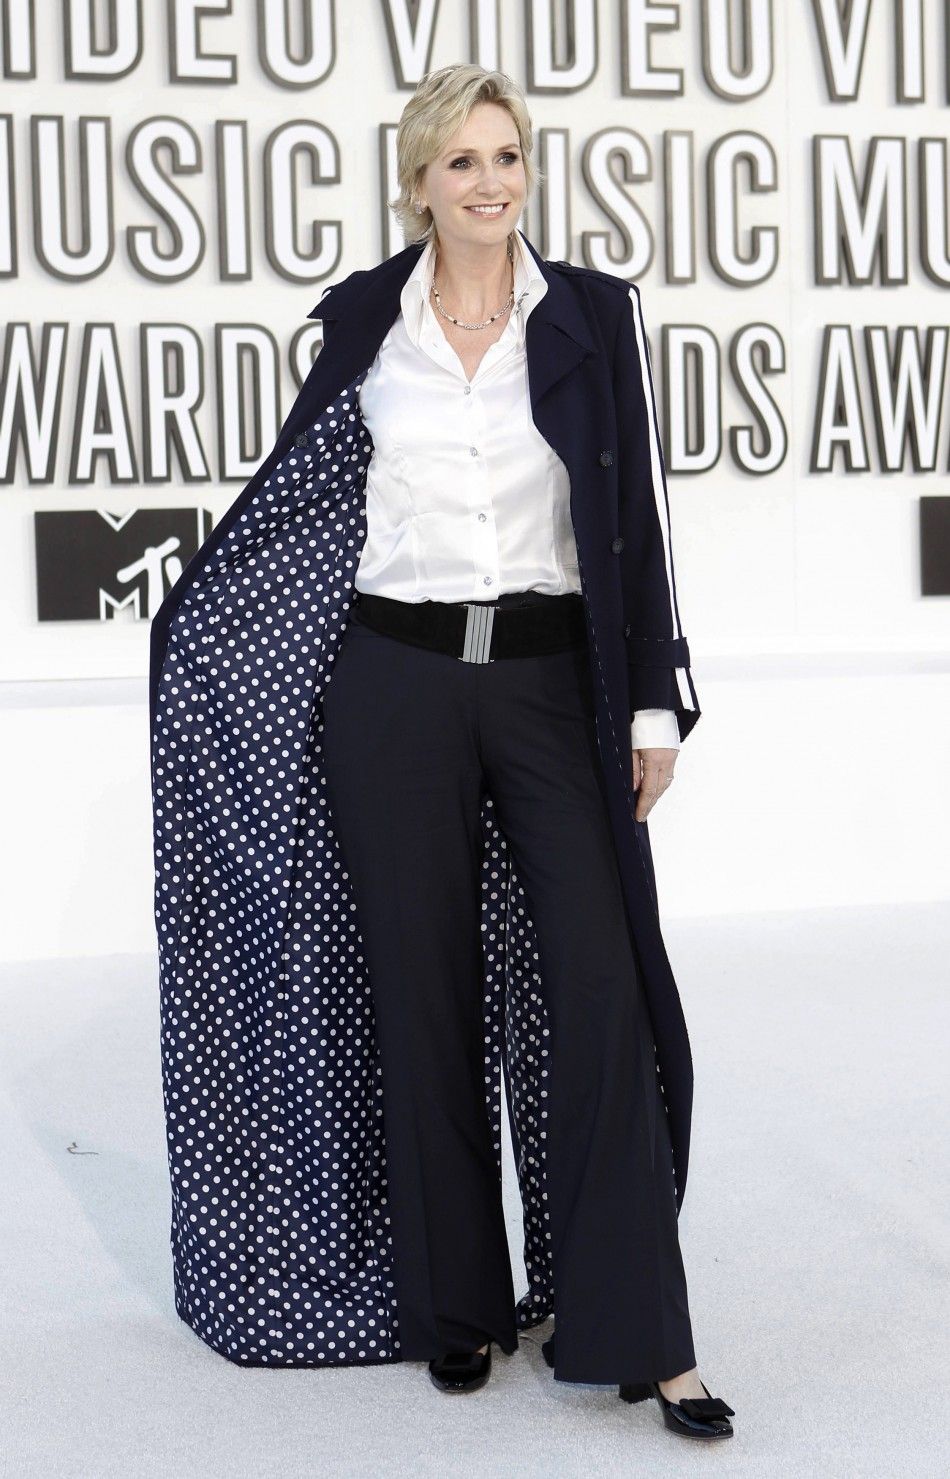 Actress Jane Lynch from the TV series 039Glee039 poses as she arrives at the 2010 MTV Video Music Awards in Los Angeles, California, September 12, 2010.